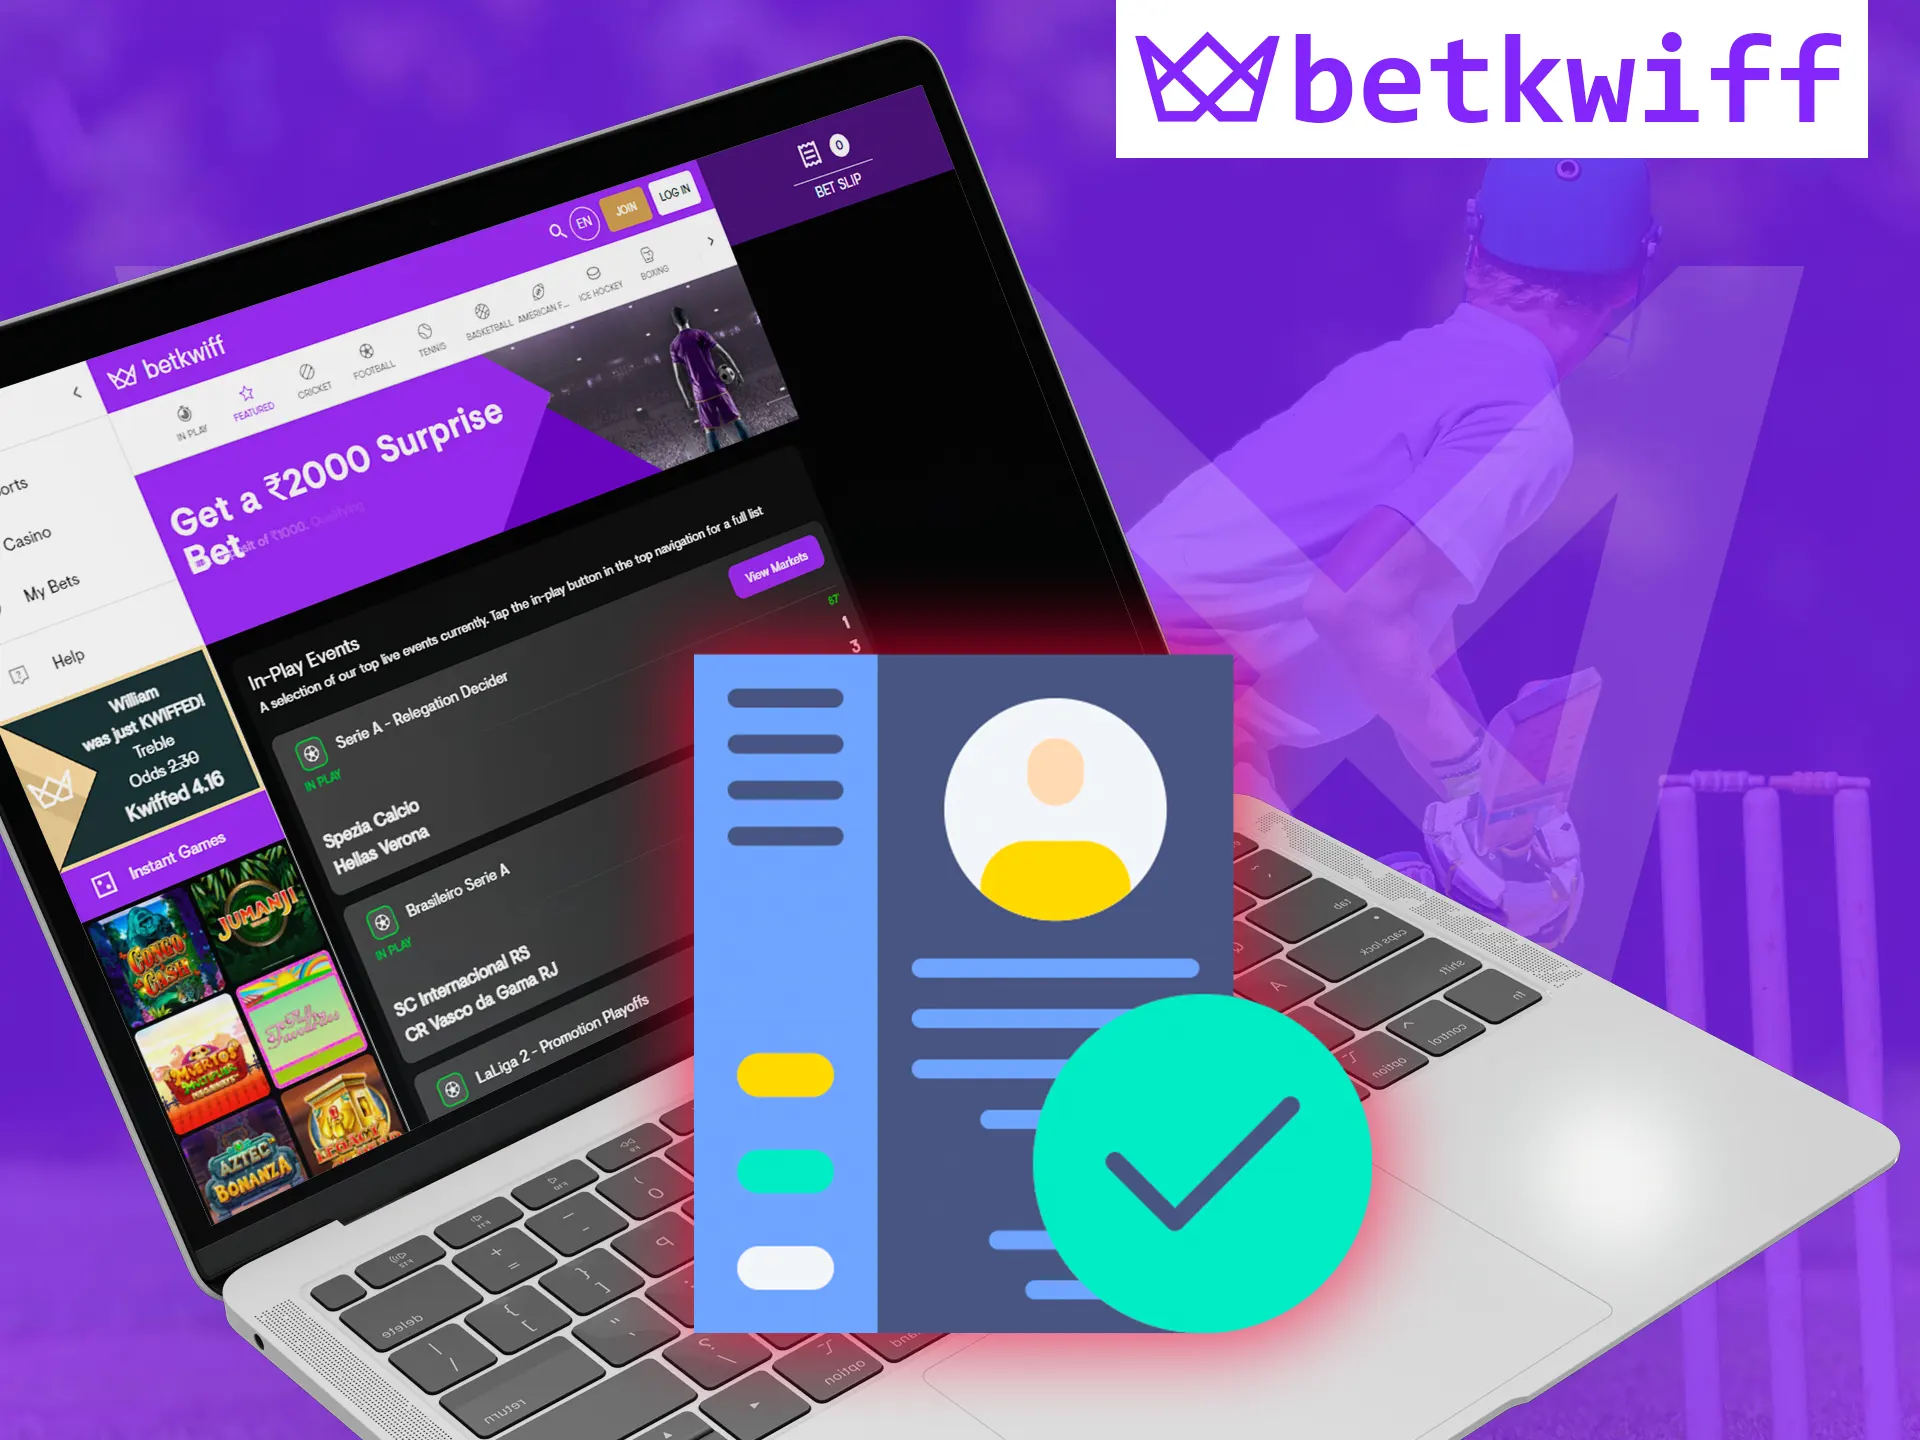 Verify with Betkwiff to play and collect your winnings.